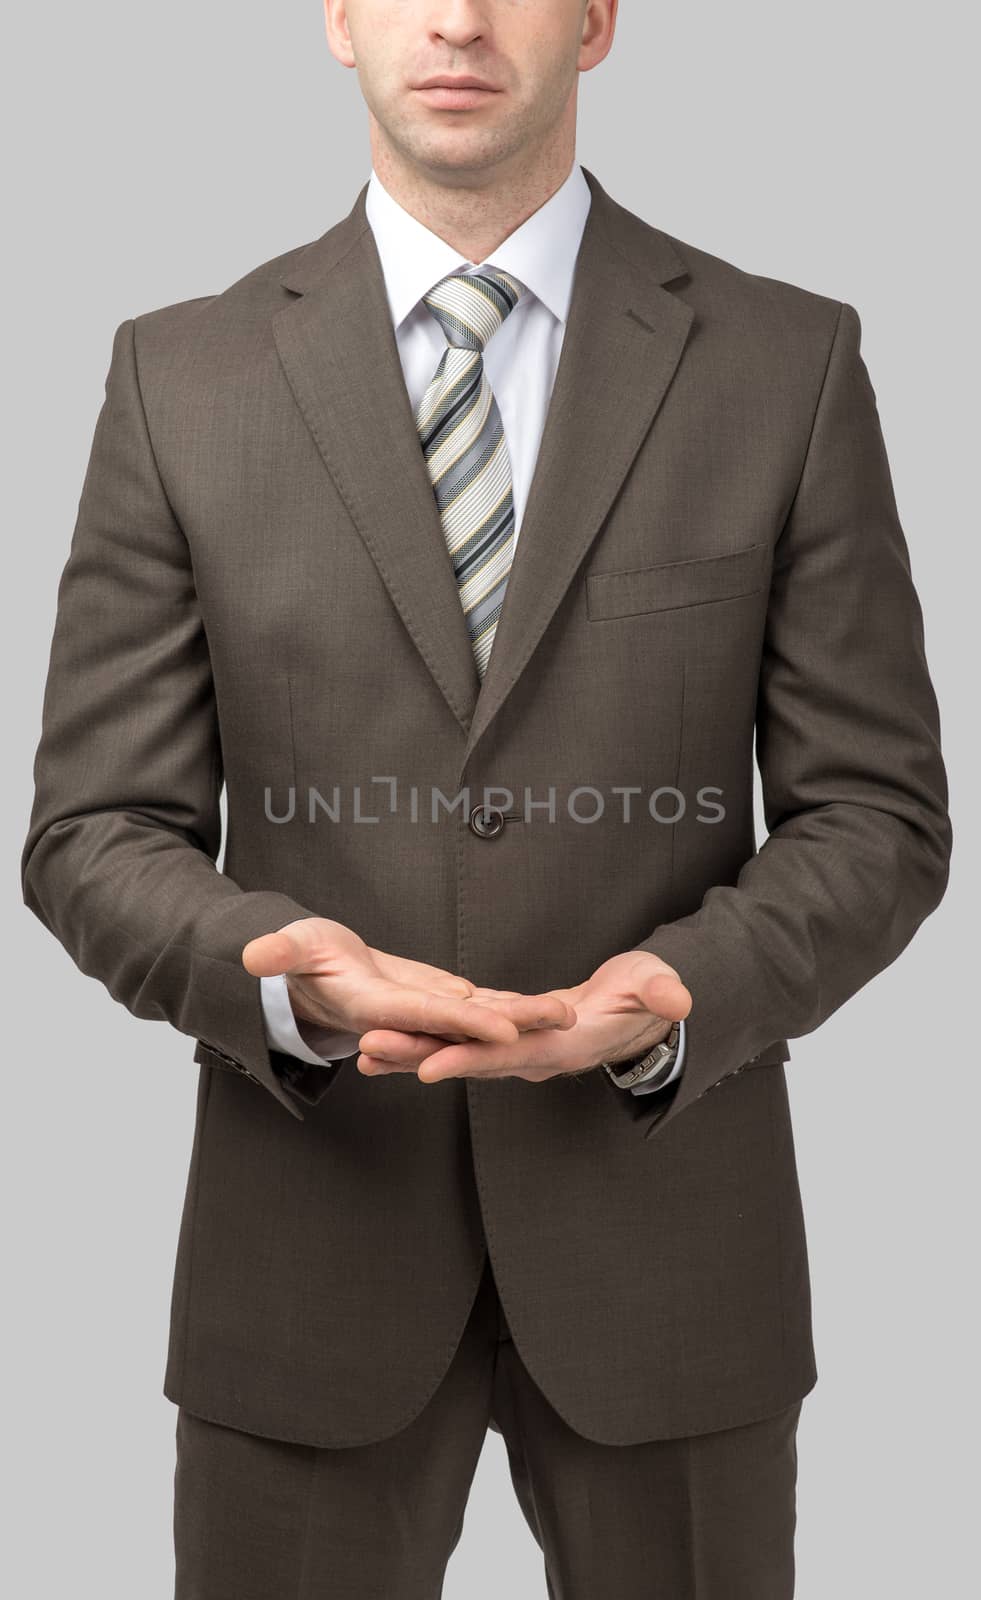 Businessman with empty hands, close up view